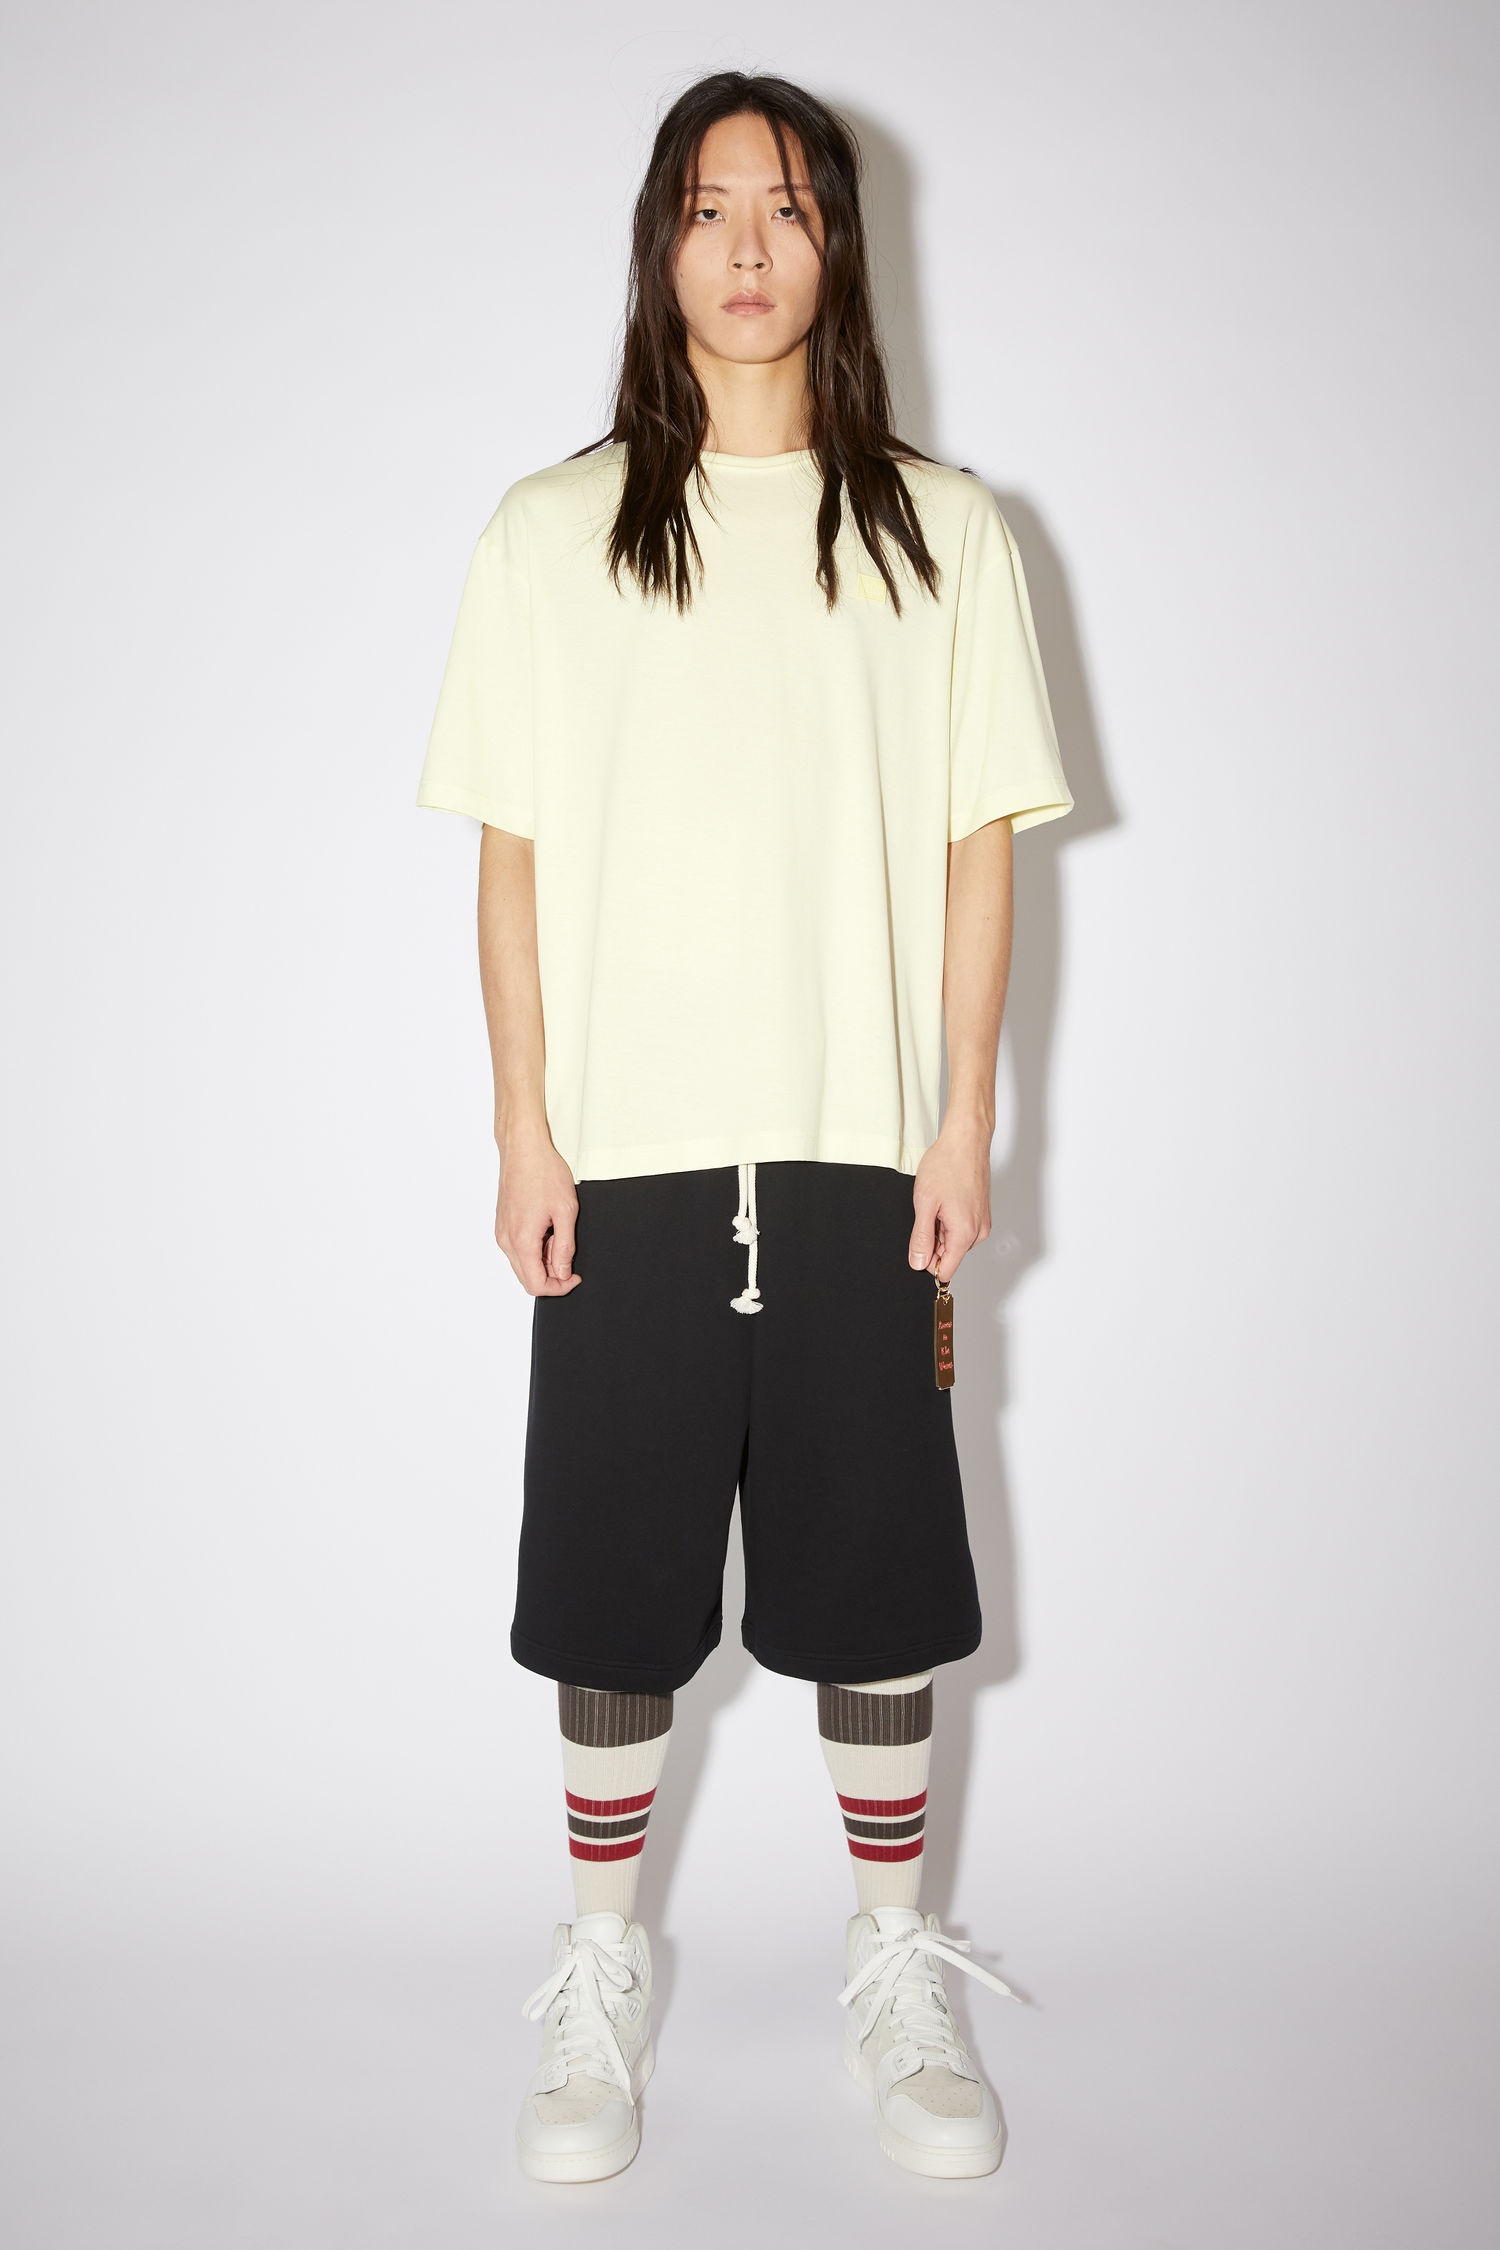 Acne Studios Relaxed fit t-shirt - Vanilla yellow | REVERSIBLE